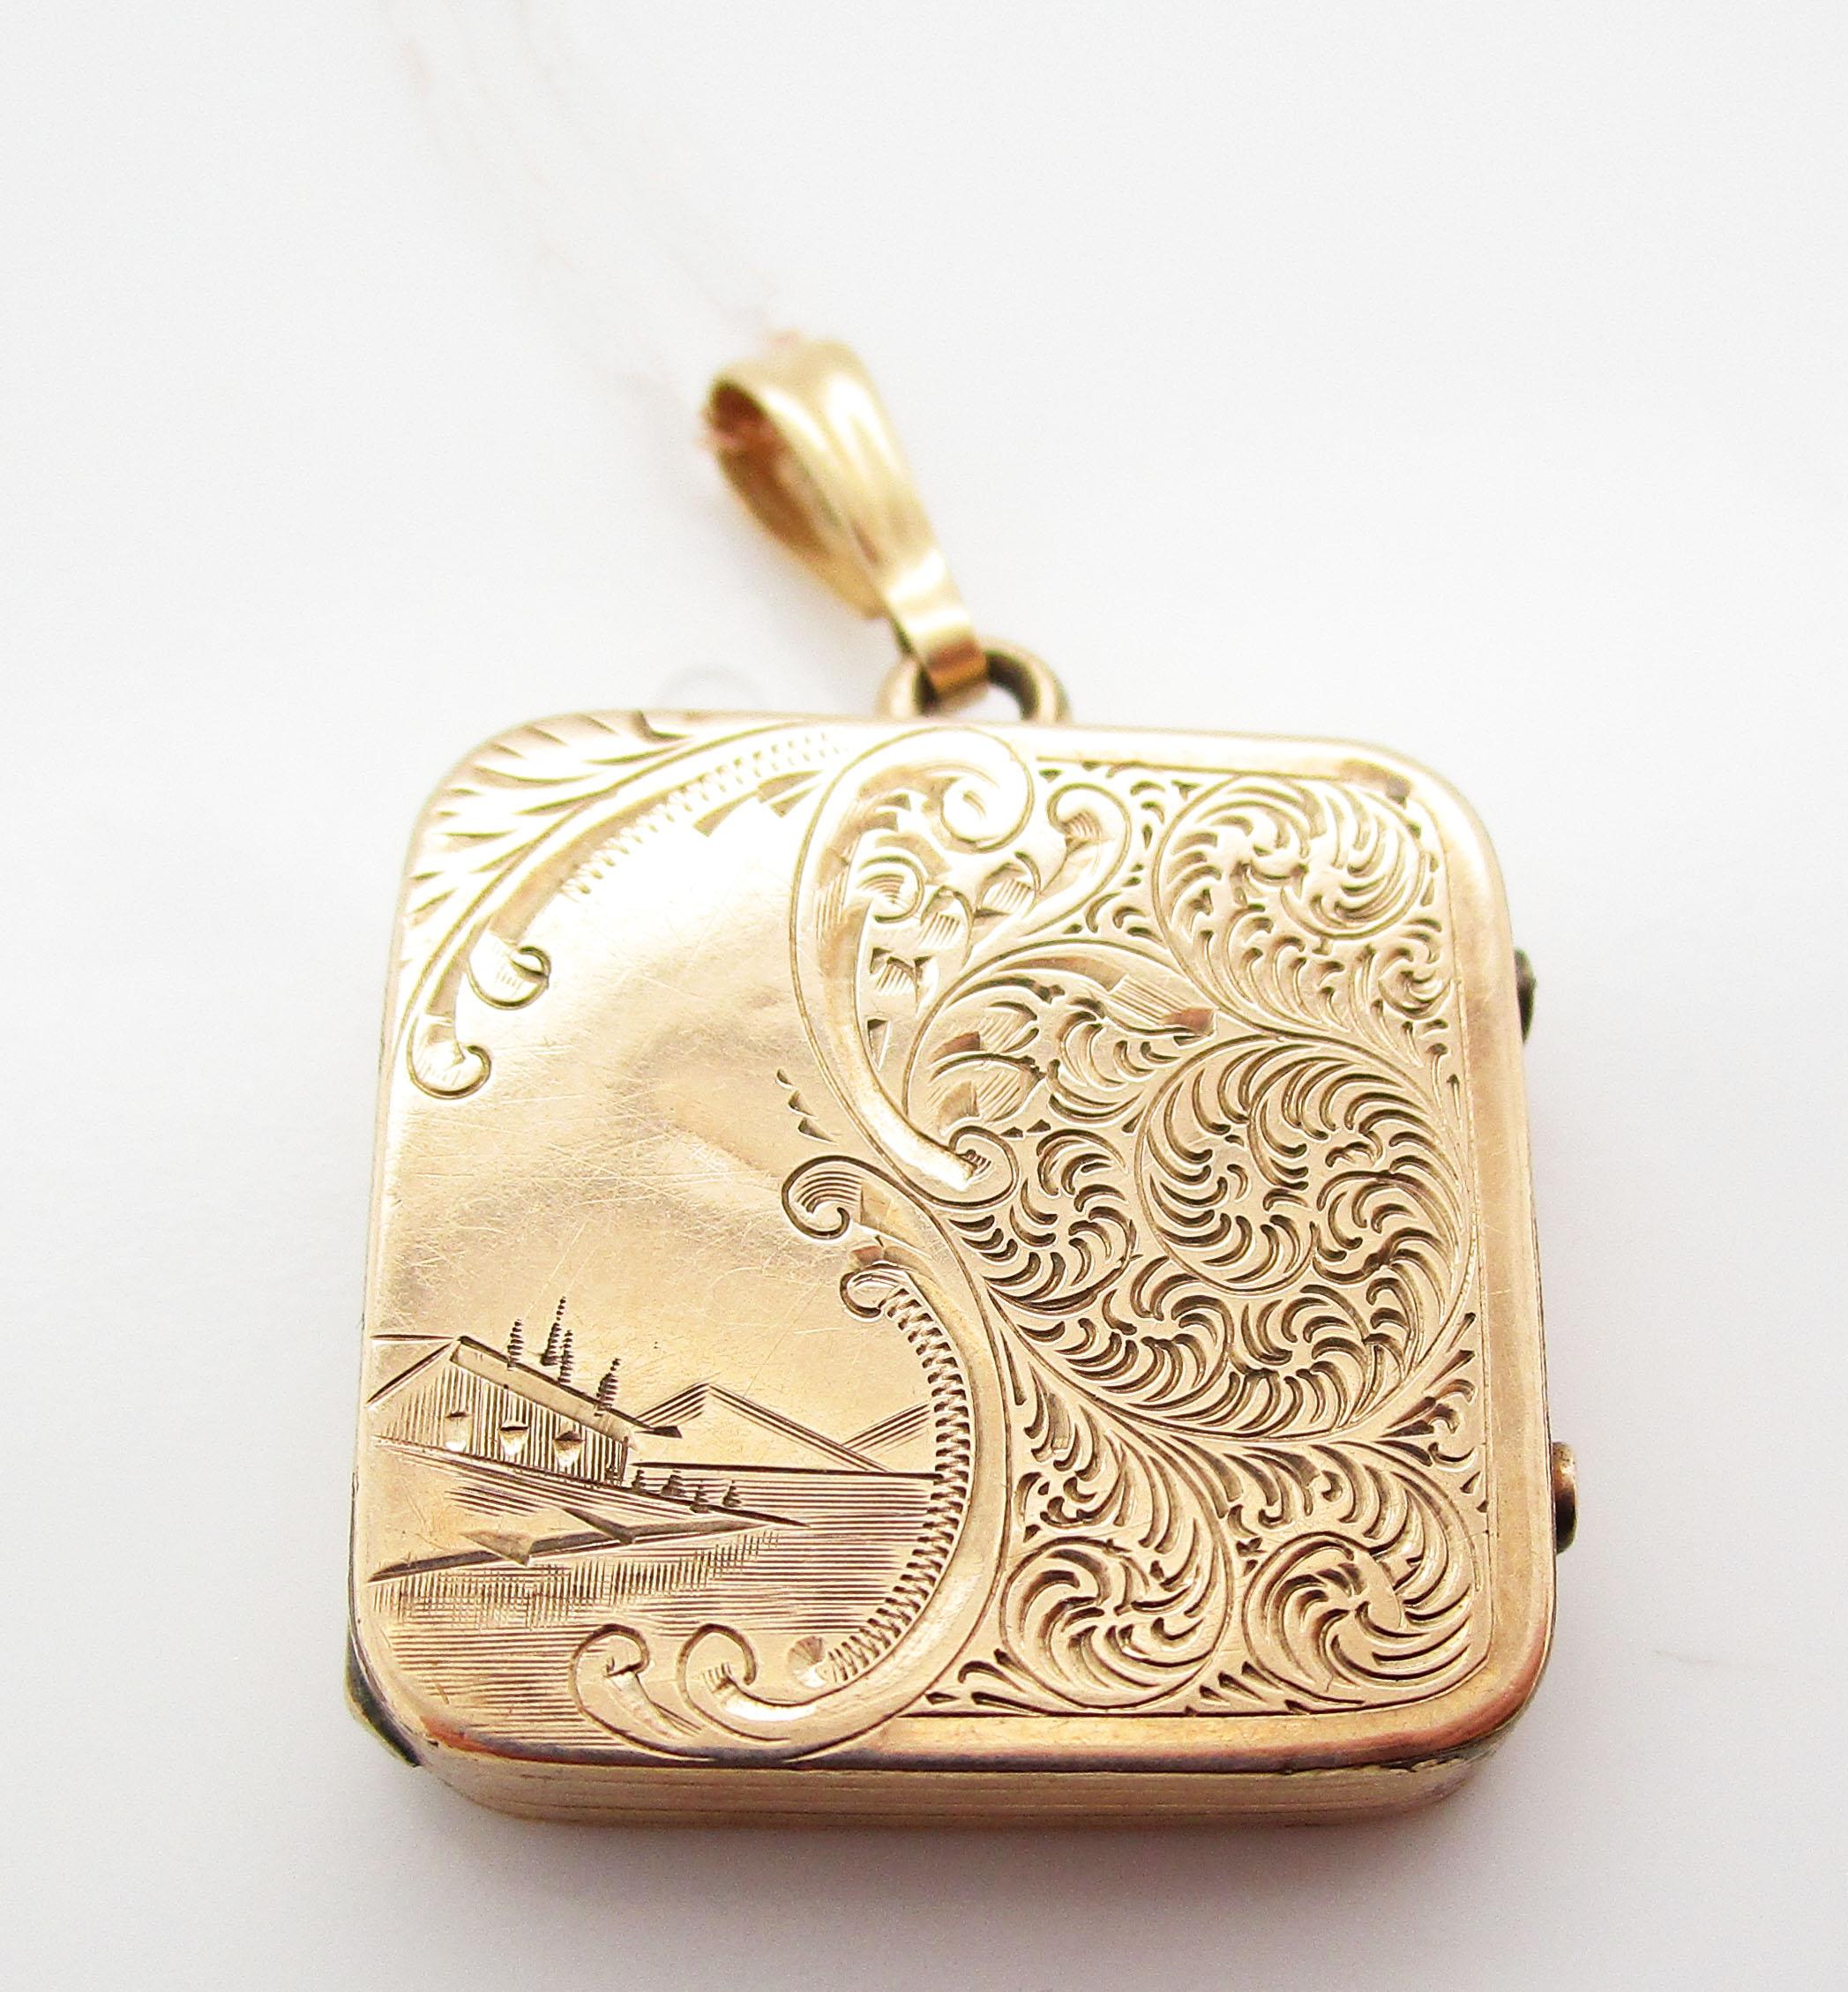 This is an absolutely lovely Victorian locket in 14k rose gold in a timeless square shape hand engraved with a stunningly detailed pattern! The front of the locket is engraved with a gorgeous swirling design on one half, while the other half of the